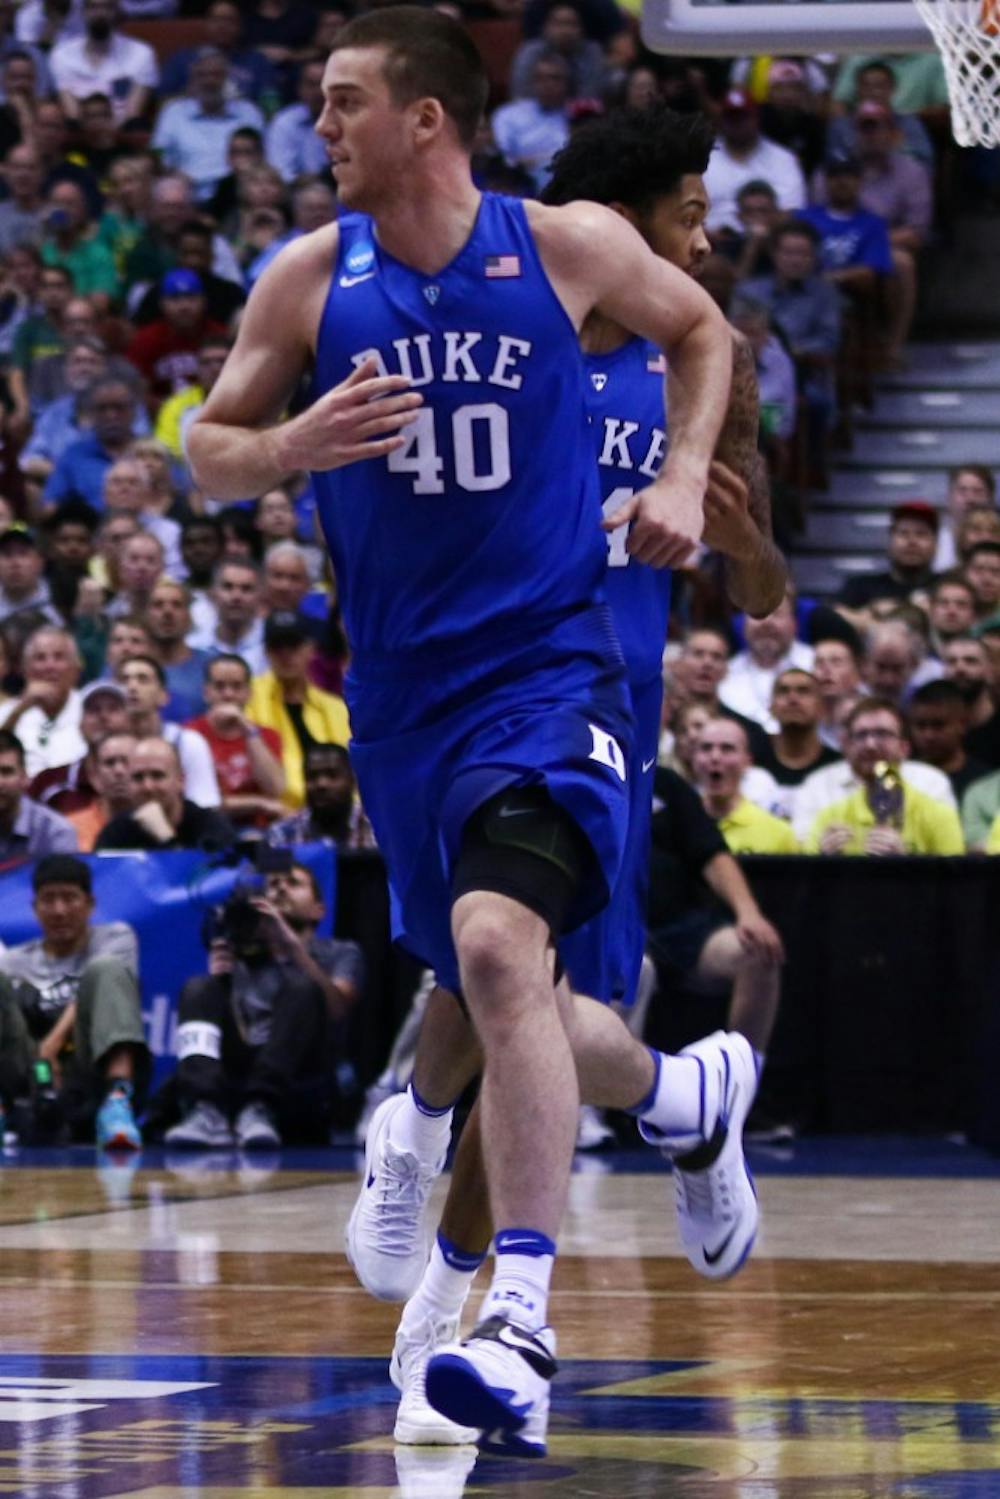 Marshall Plumlee's Duke career came to an end Thursday with six points and five rebounds in the Sweet 16 loss to Oregon.